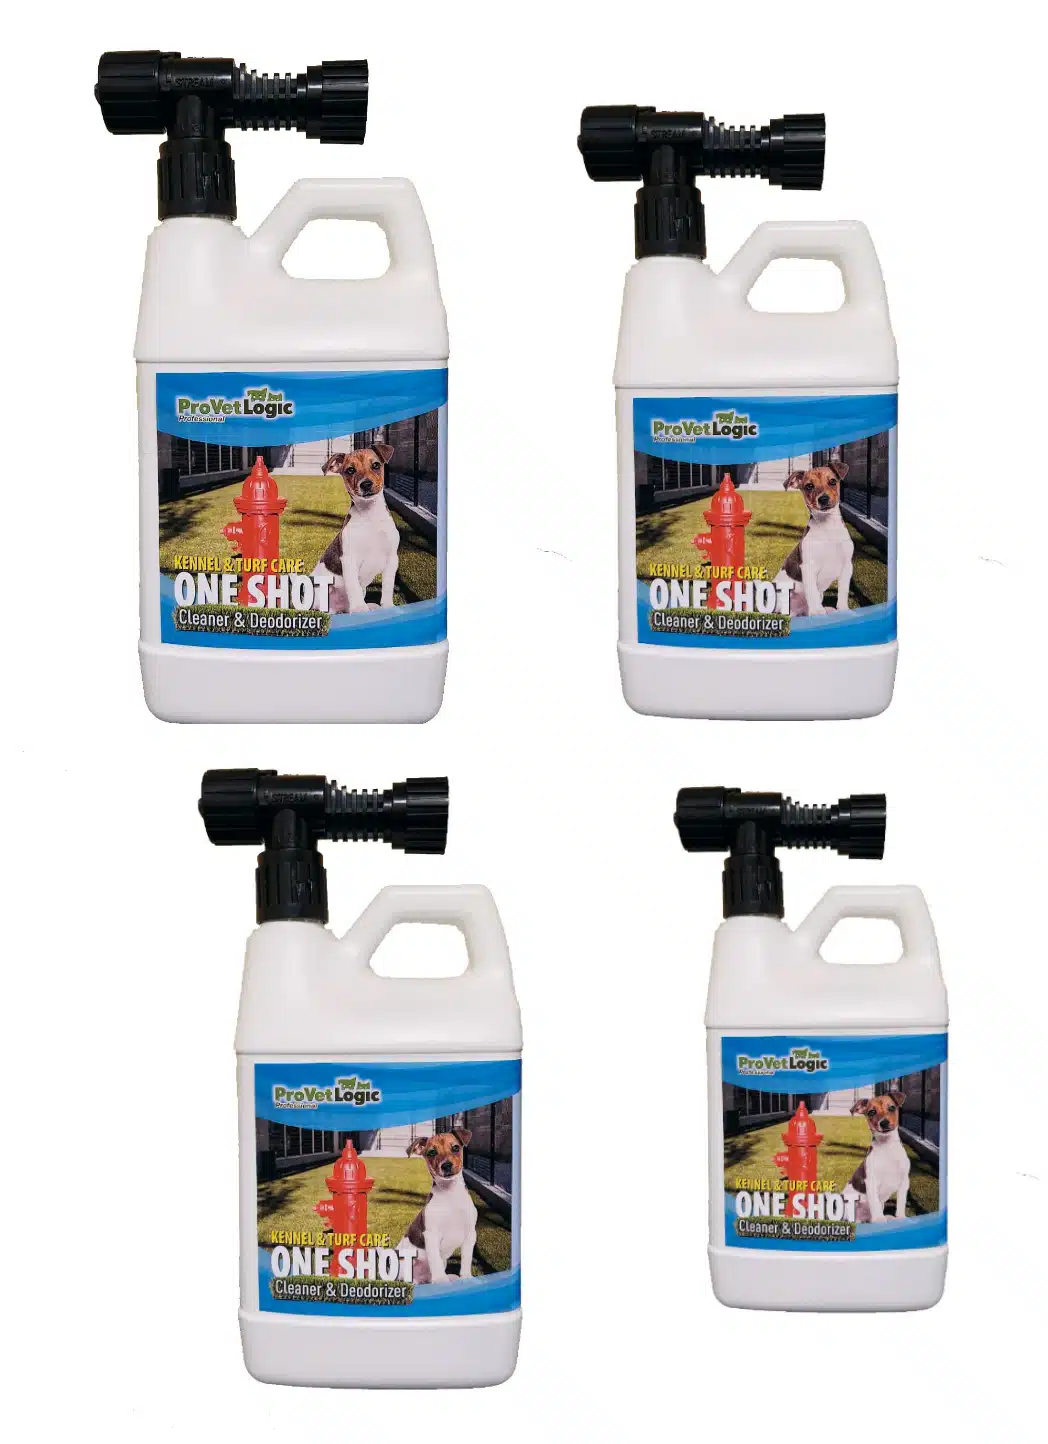 Kennel and Turf Care One Shot Synthetic Turf Cleaner